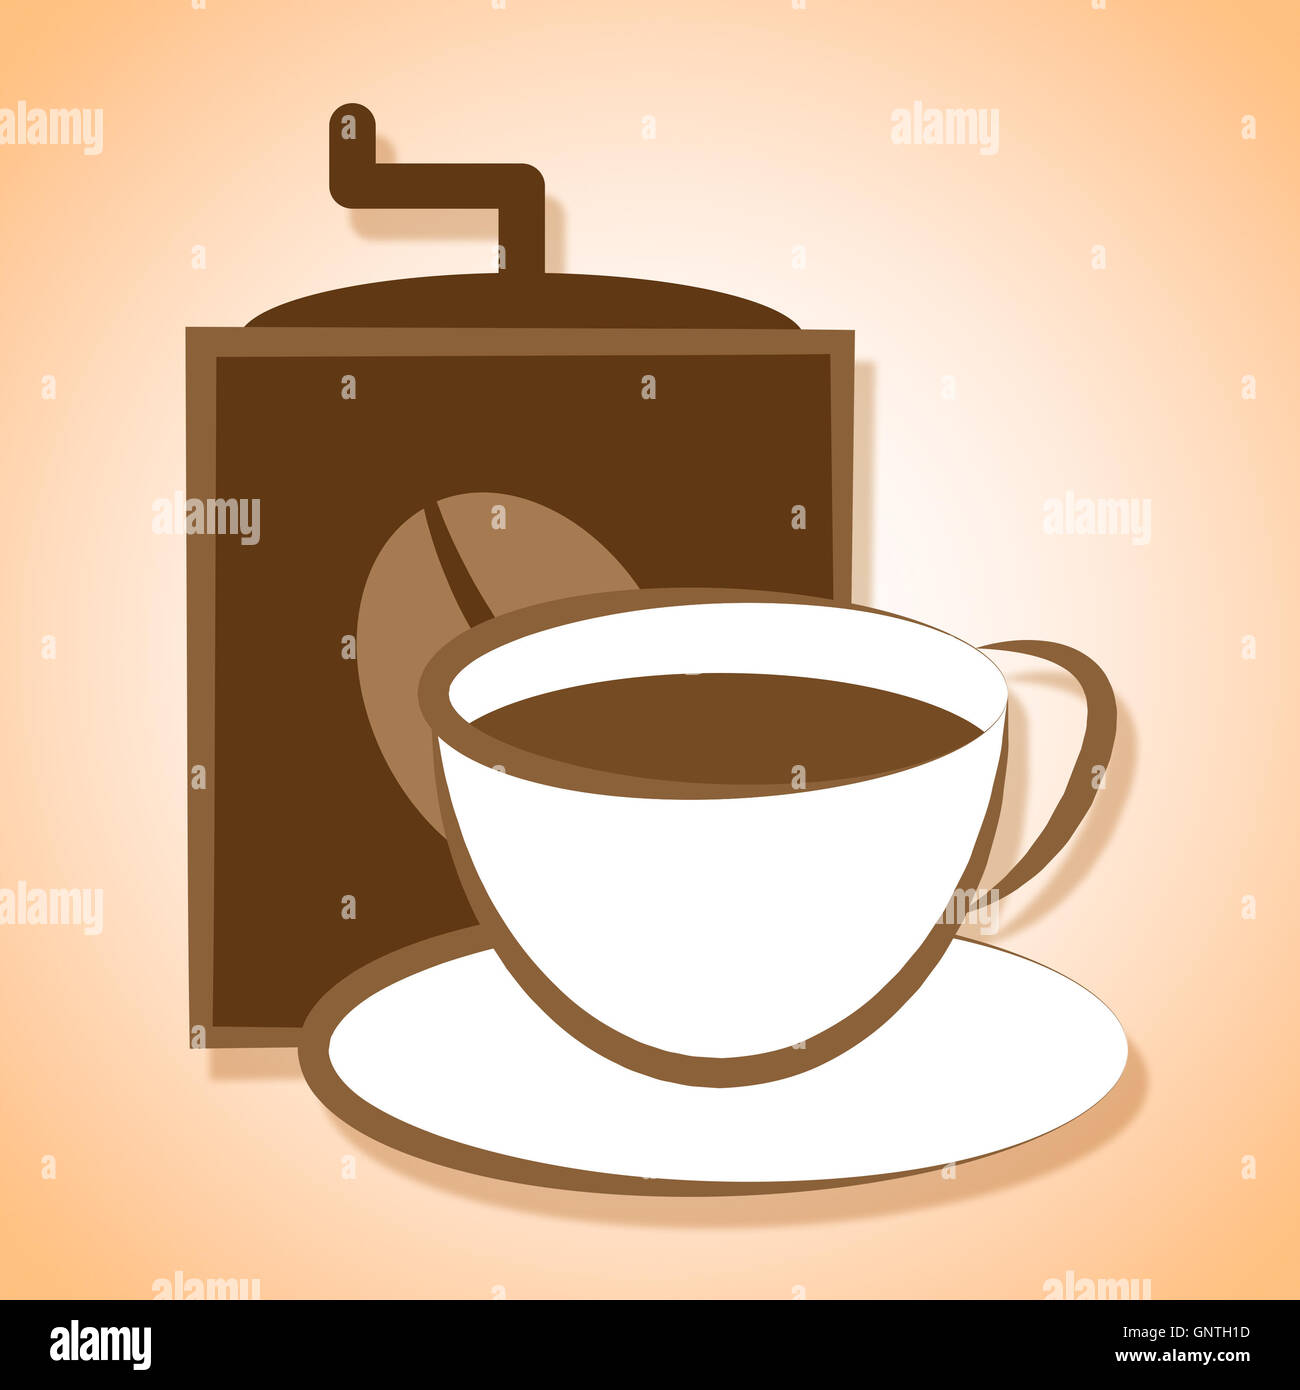 Fresh Coffee Meaning Cafe And Restaurant Brew Stock Photo